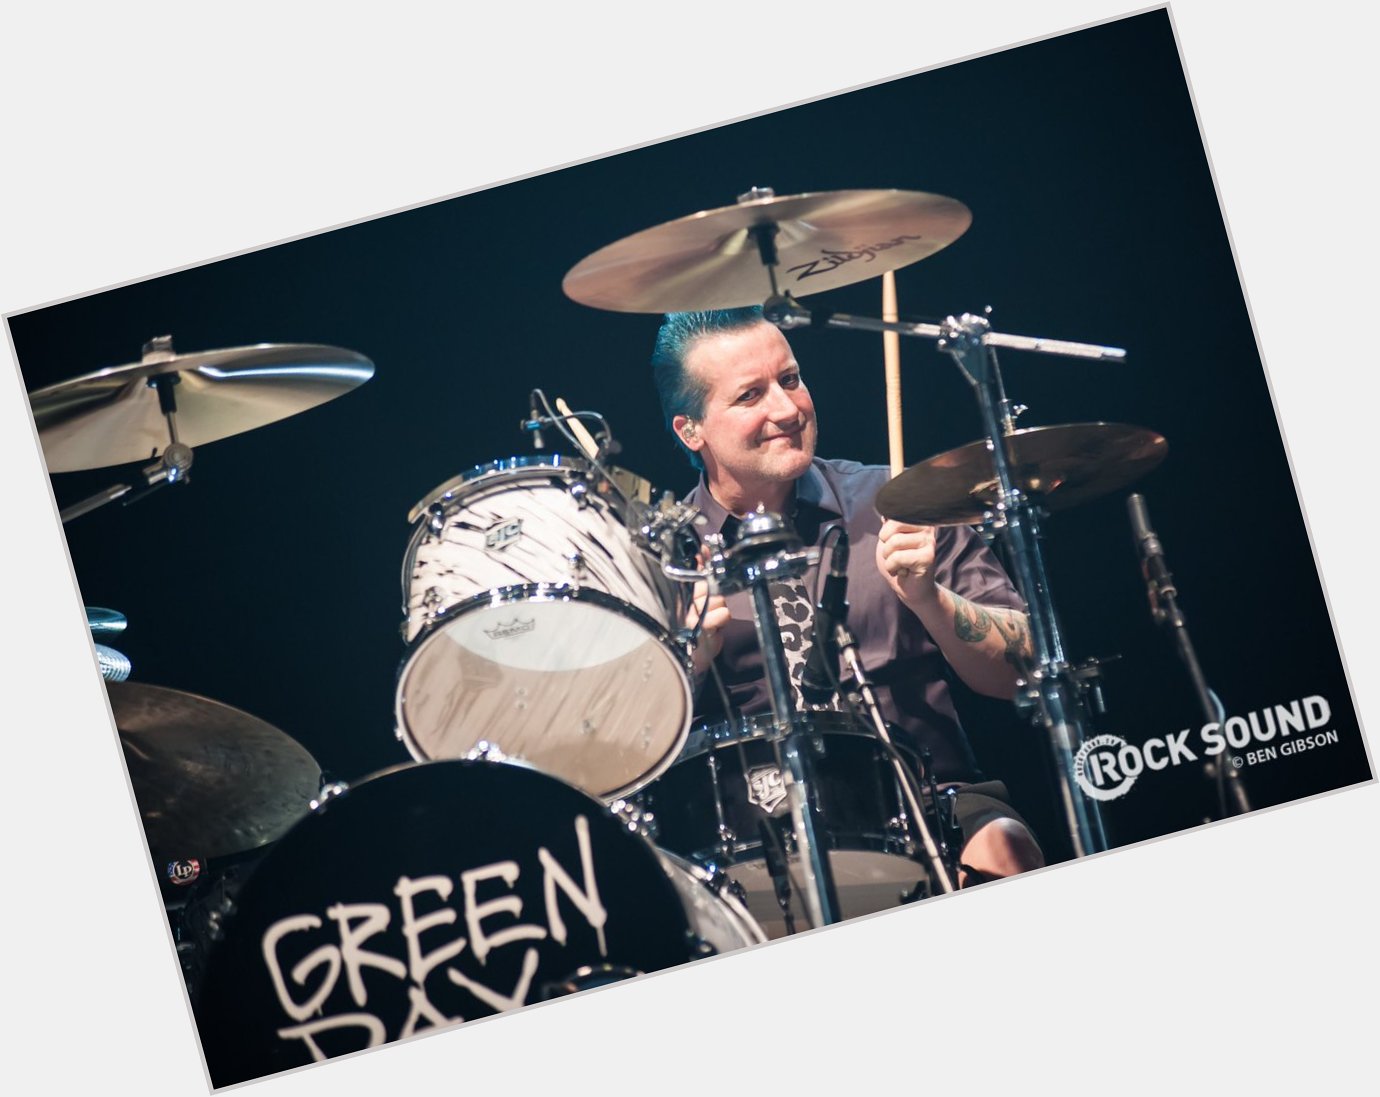 Happy 49th Birthday to Tré Cool! The drummer for Green Day. 